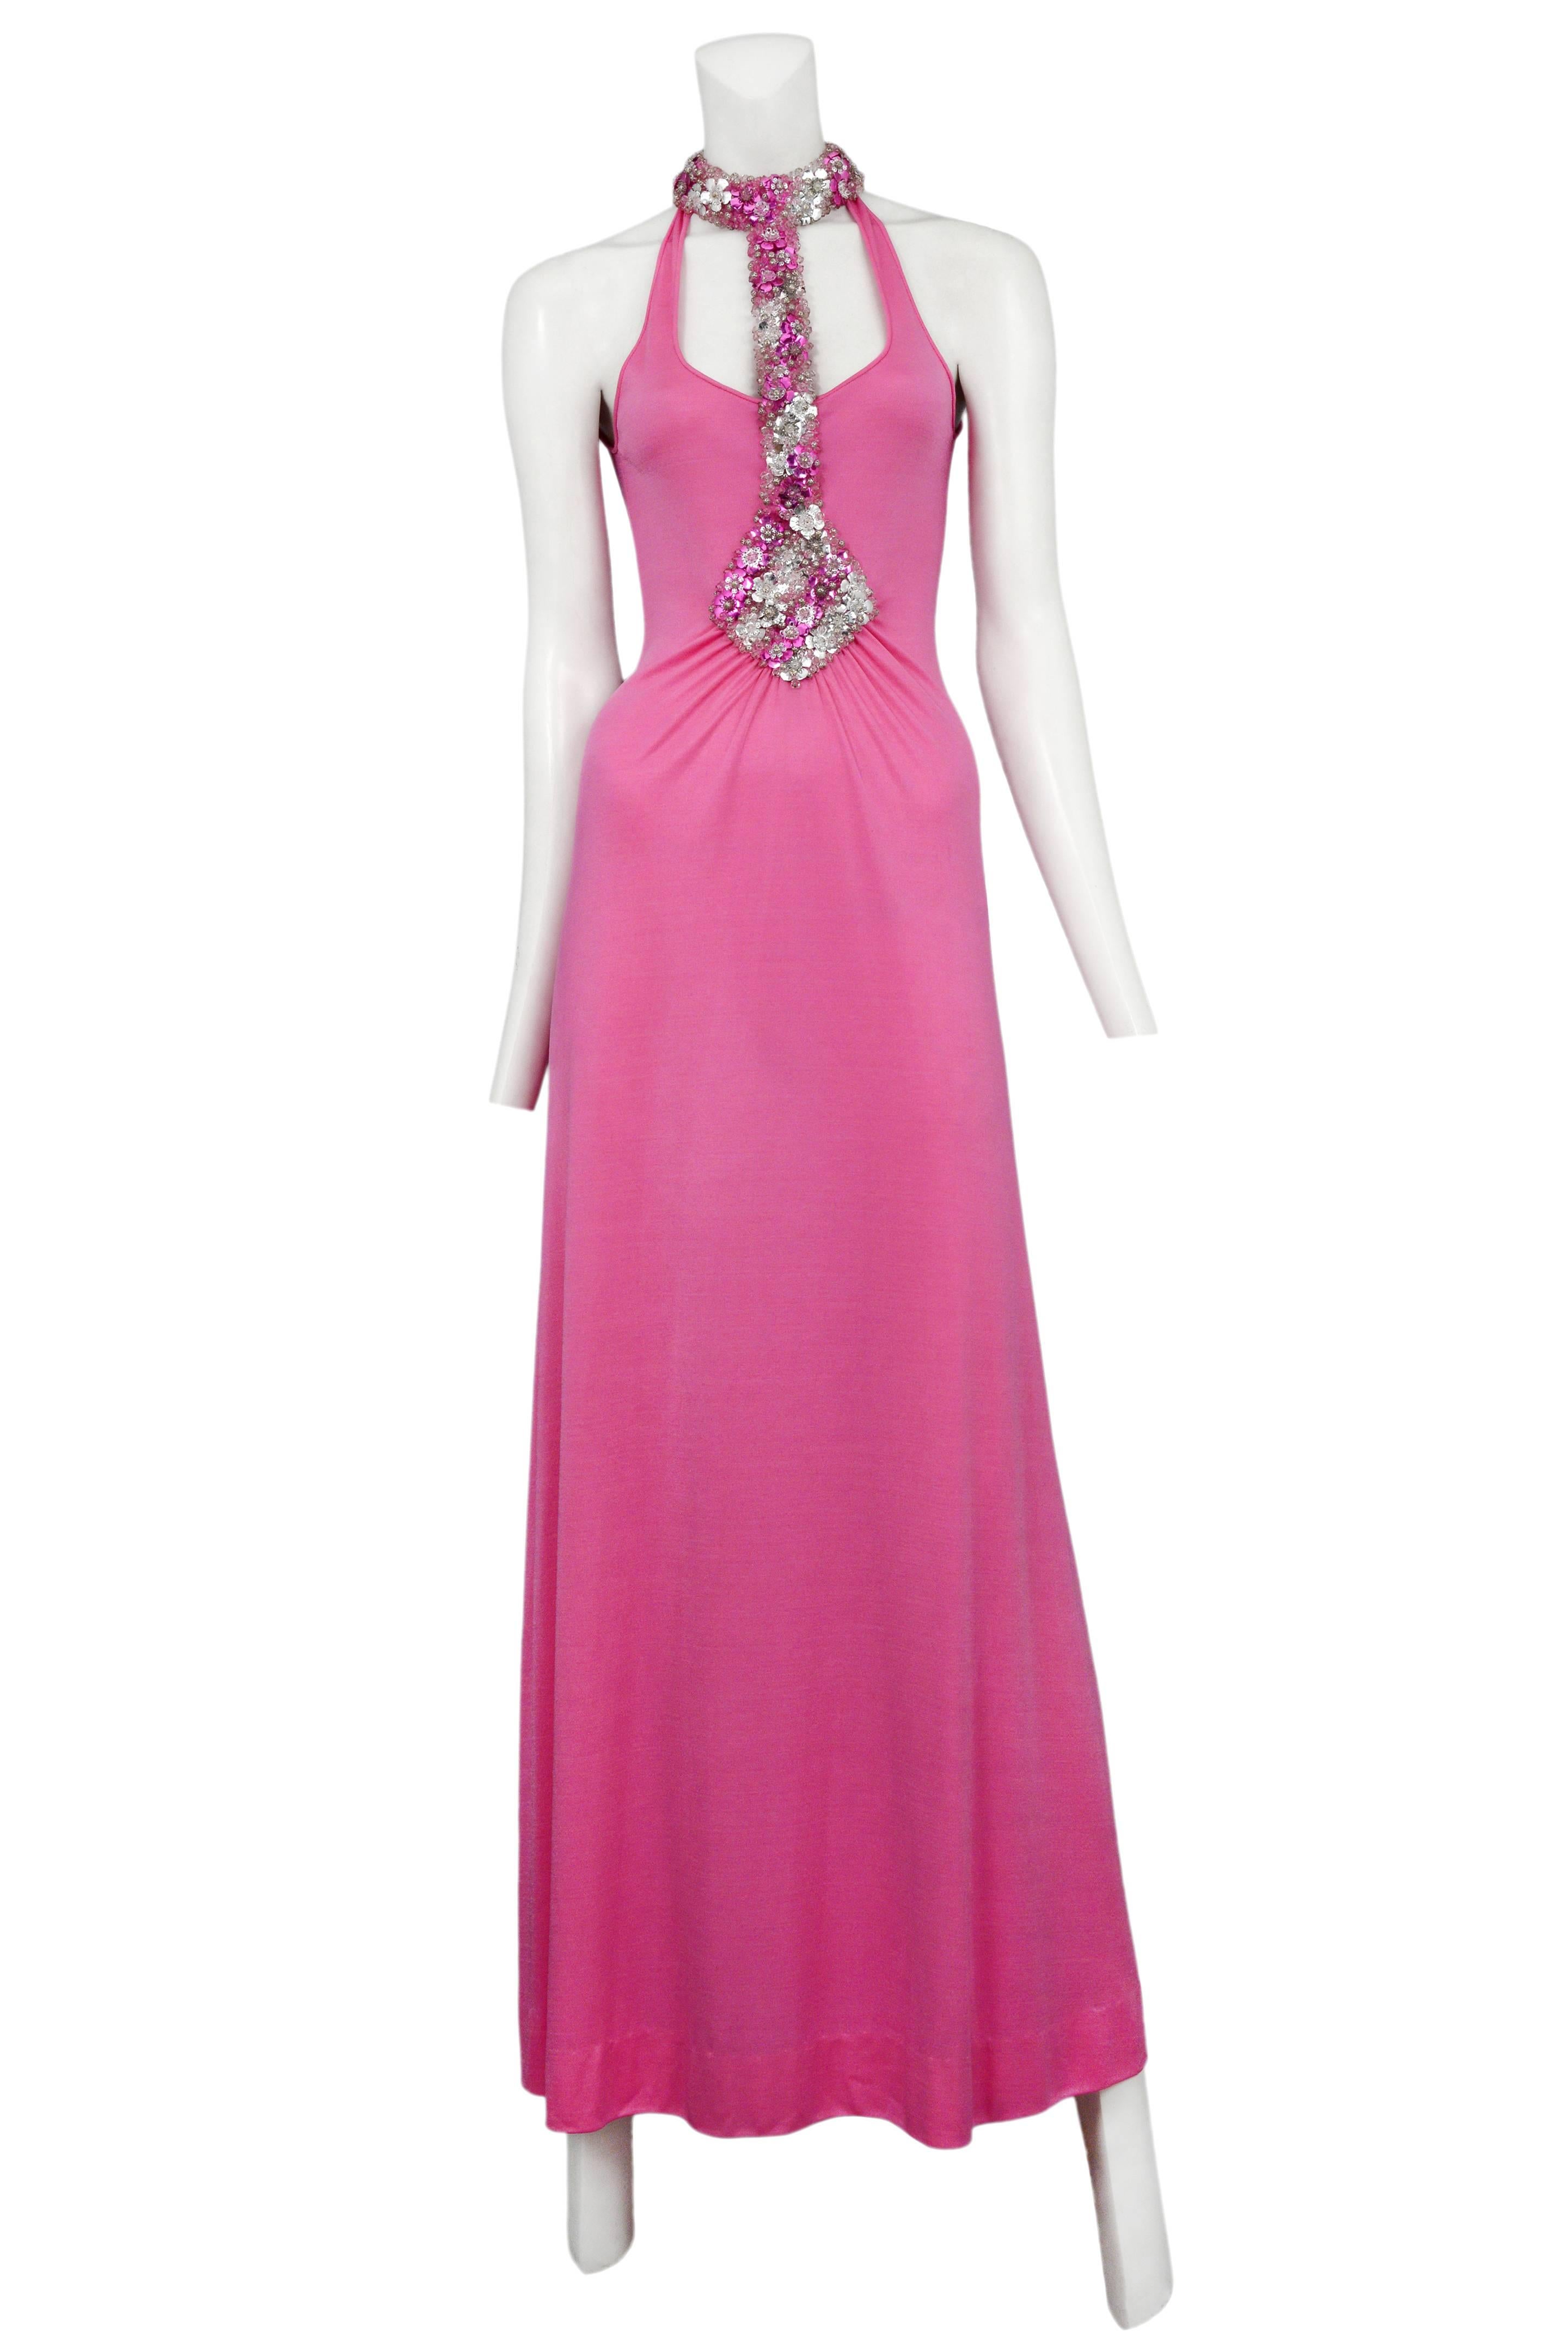 Vintage Loris Azzaro pink sleeveless maxi gown featuring pink and silver floral beading along the waist to neck collar harness, gathering at the waist and an open back.
Please inquire for additional images.